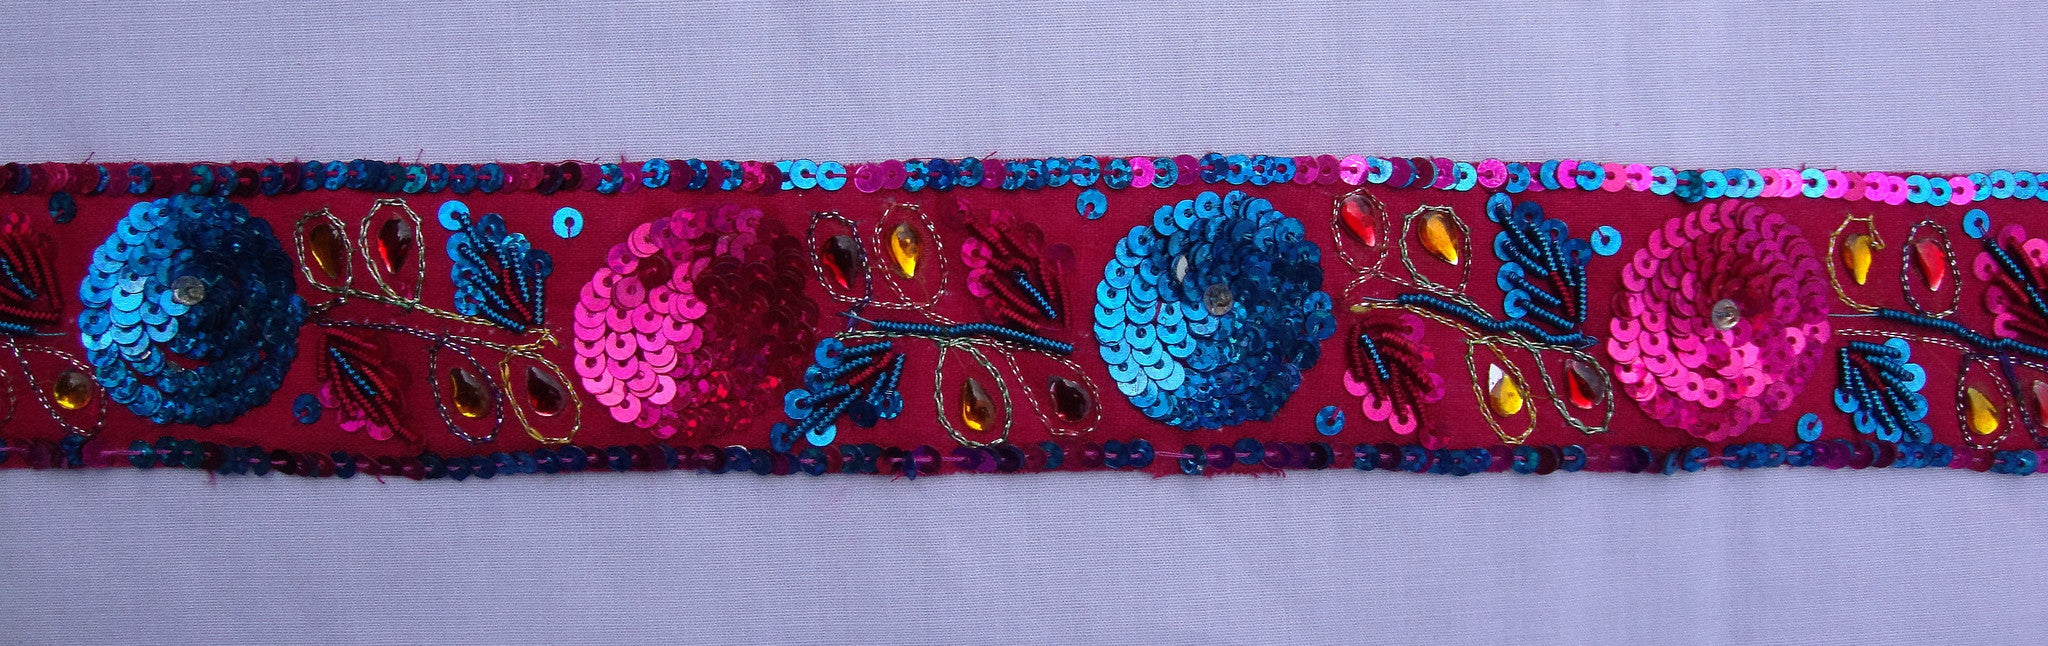 Fuchsia & Turquoise Sequin Trimming (Sold as a 3 yard piece)